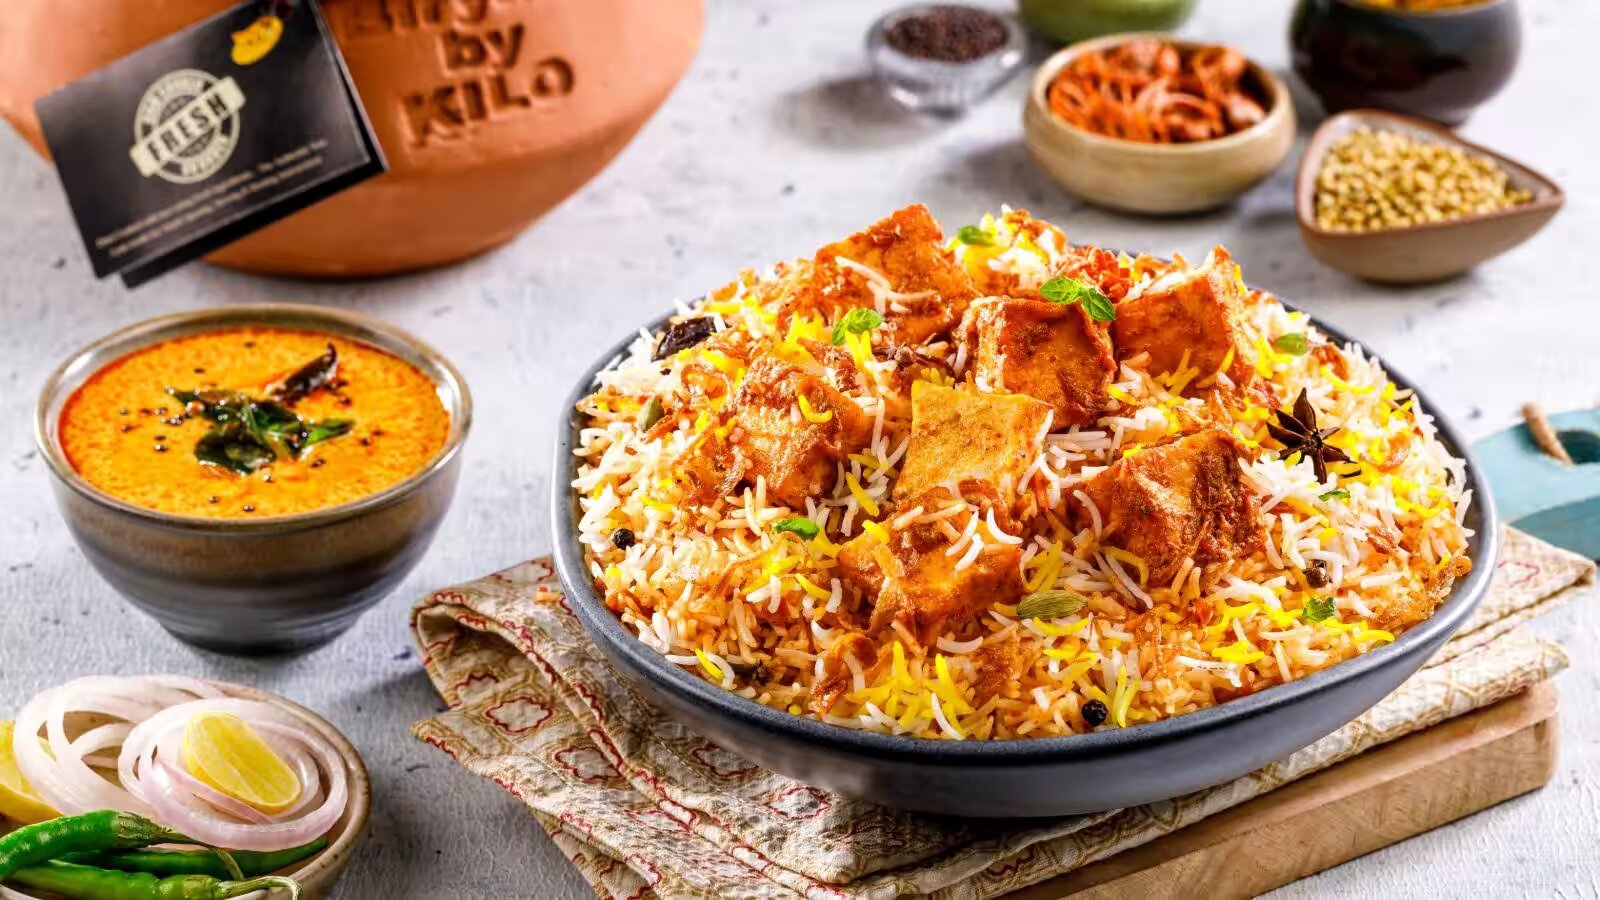 Biryani By Kilo spices up funding, bags $9M from multiple ventures in Series C